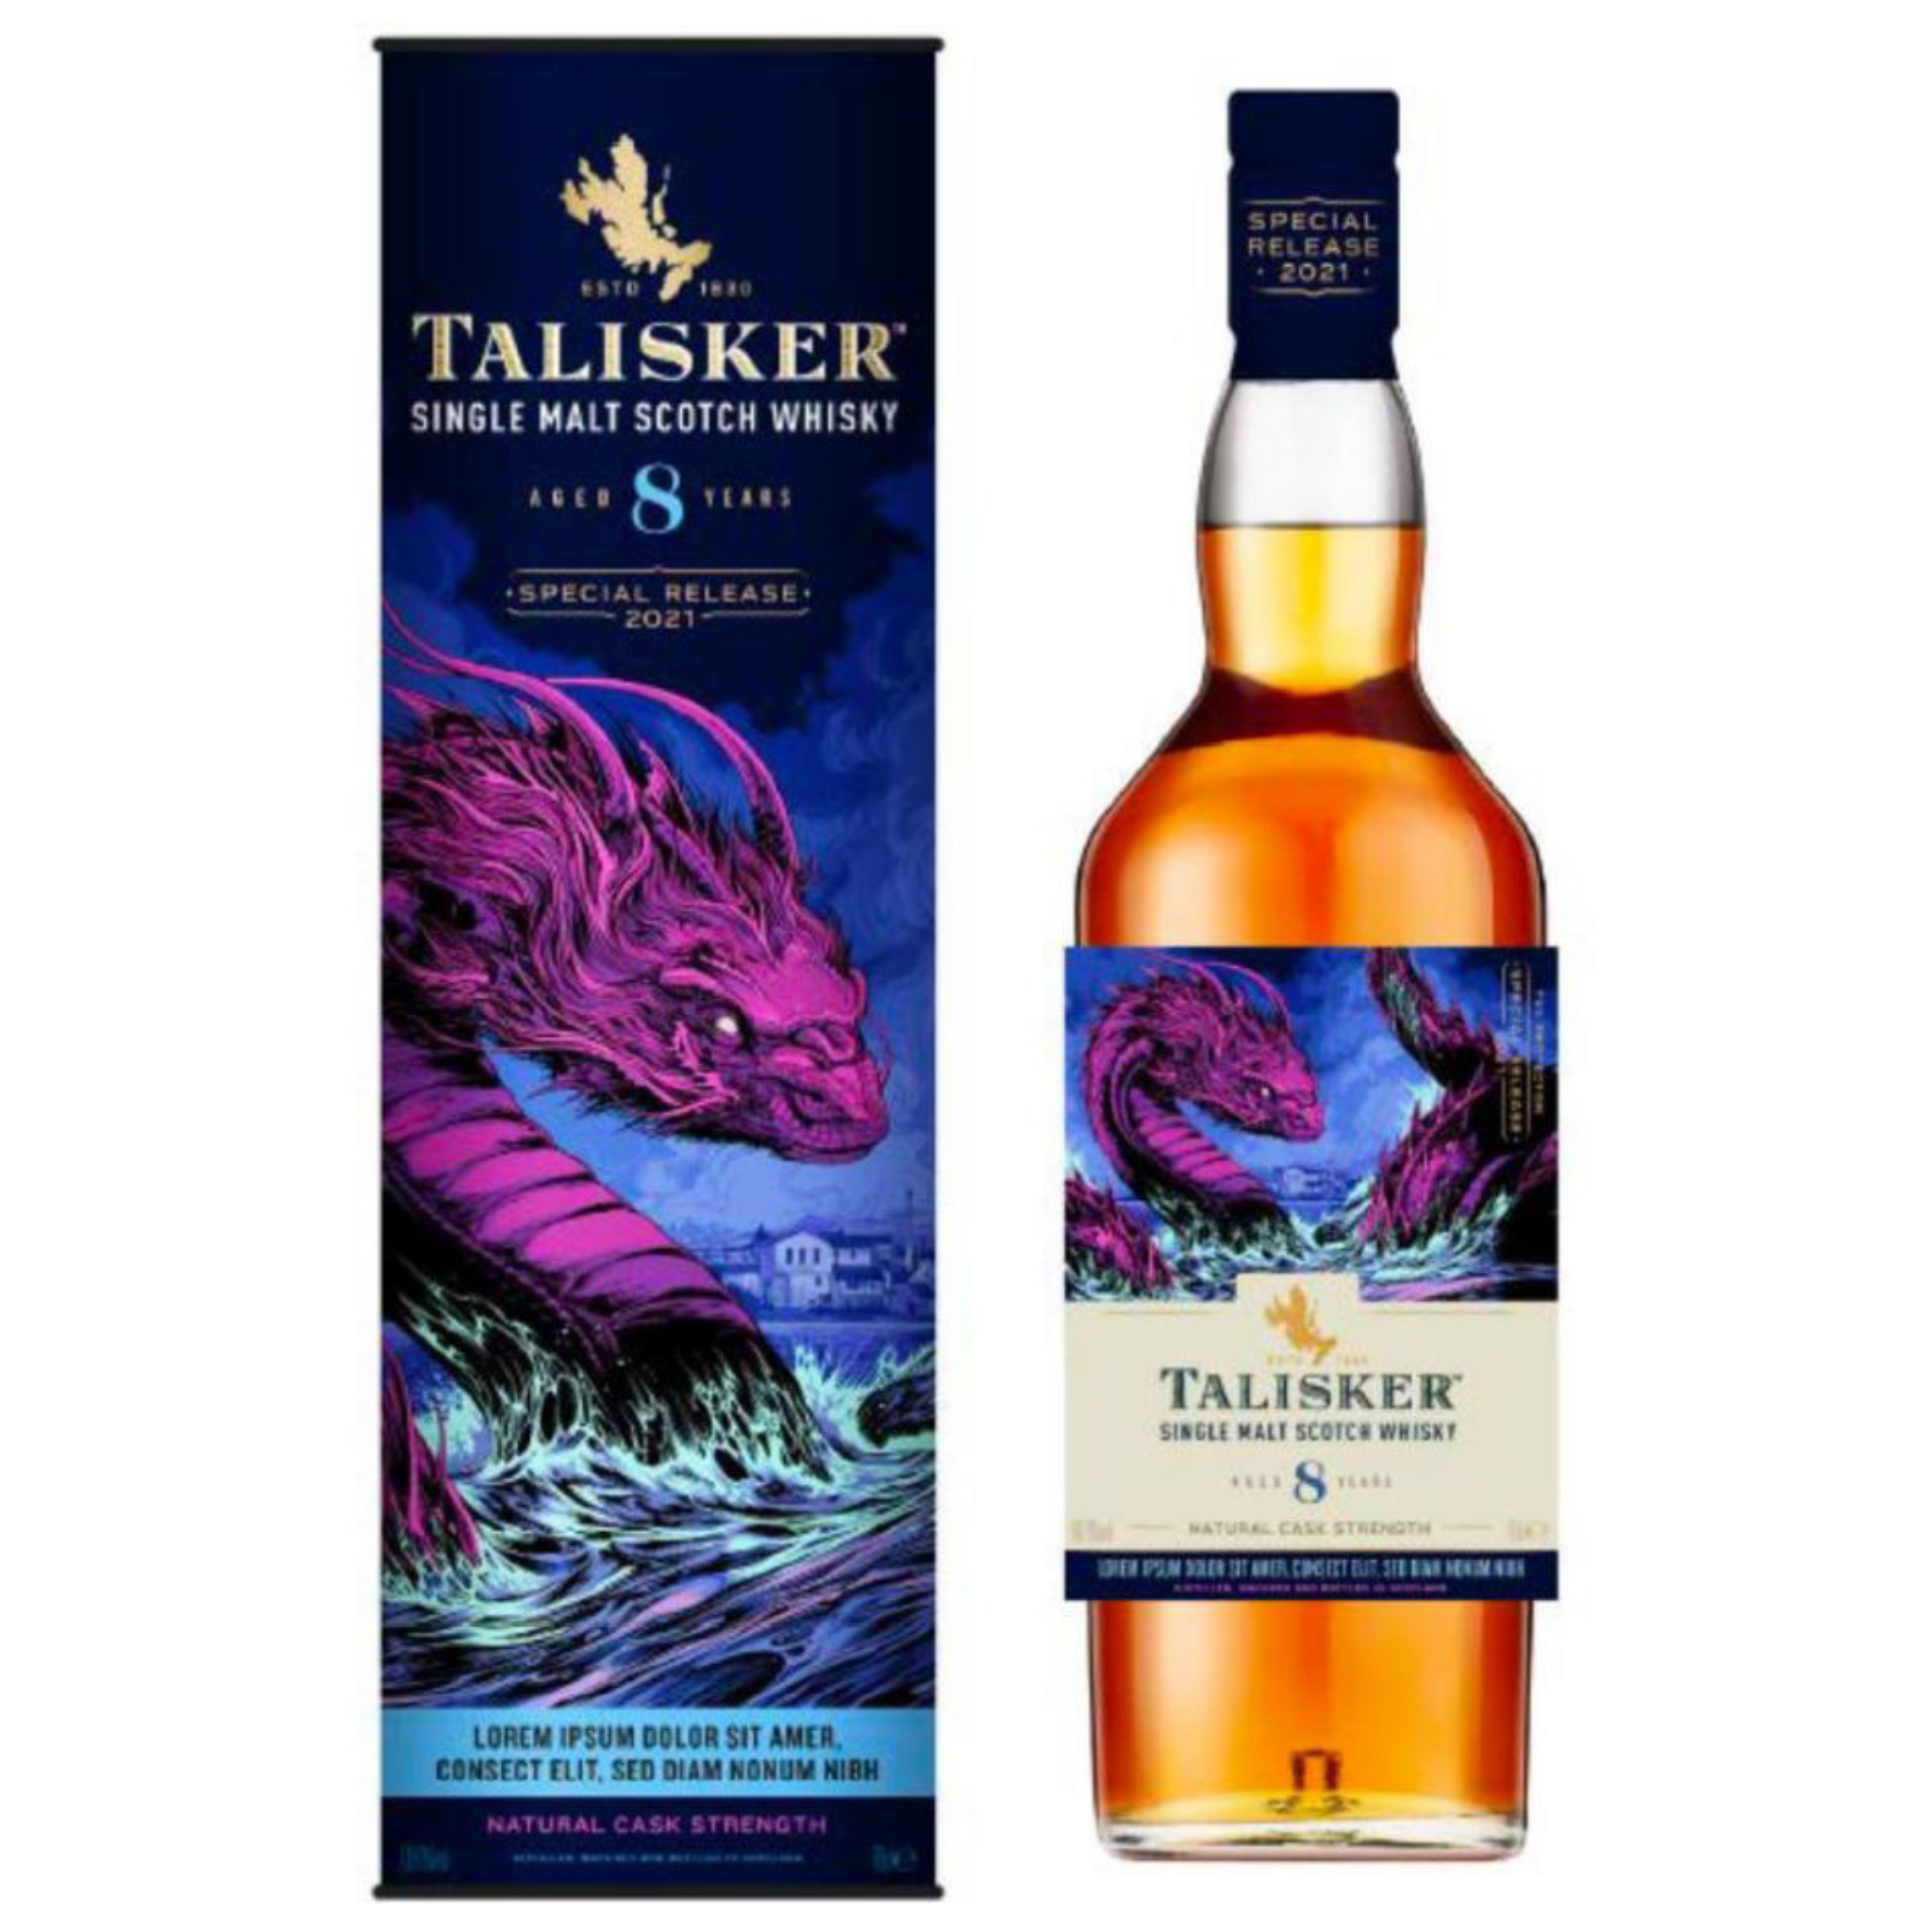 Talisker 'The Rogue Seafury' 8 Year Old Special Release 700mL